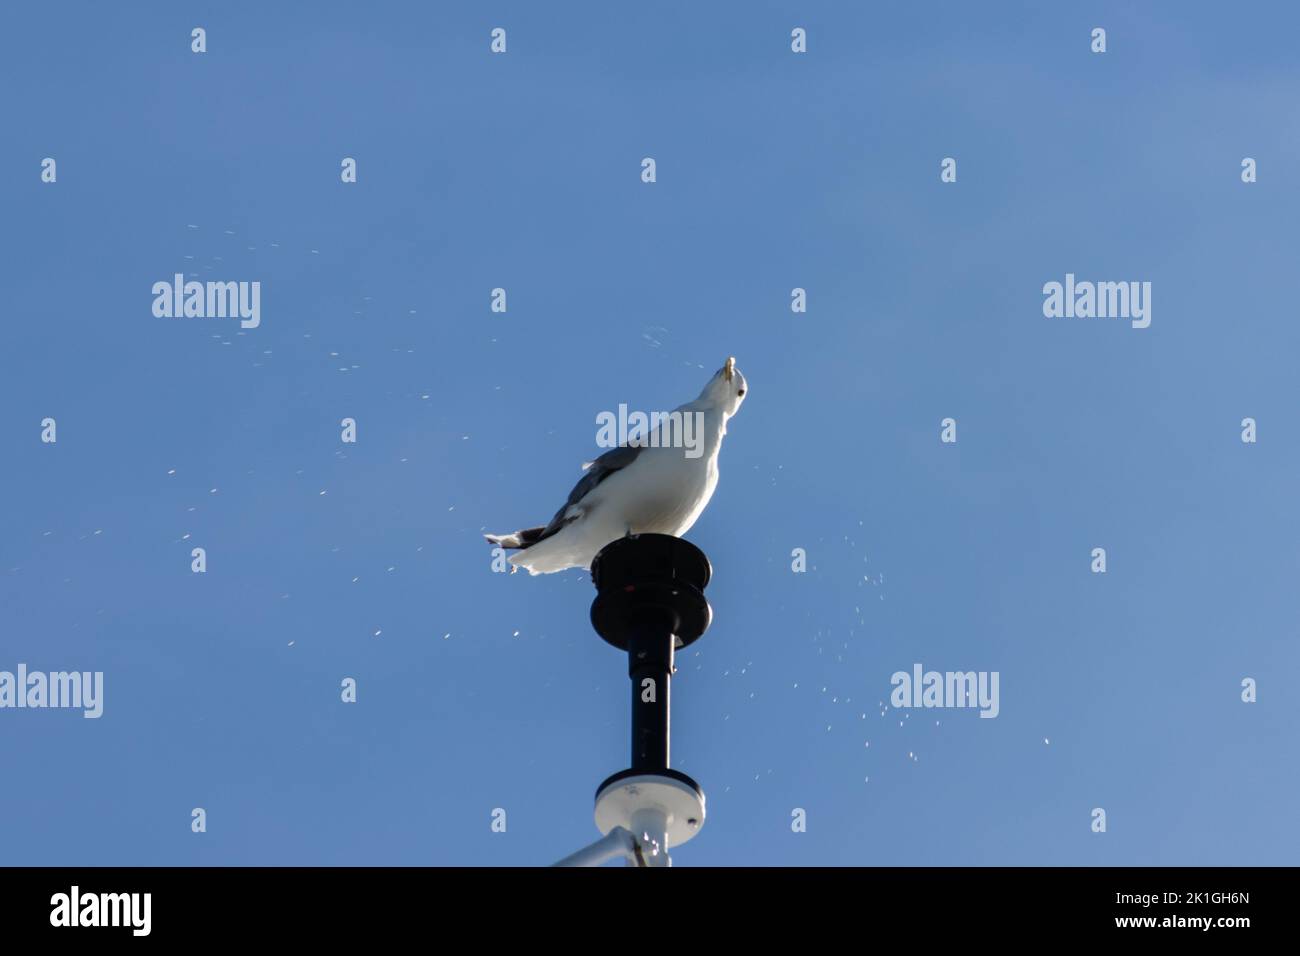 Seagull sitting on a position light and shaking off water drops Stock Photo